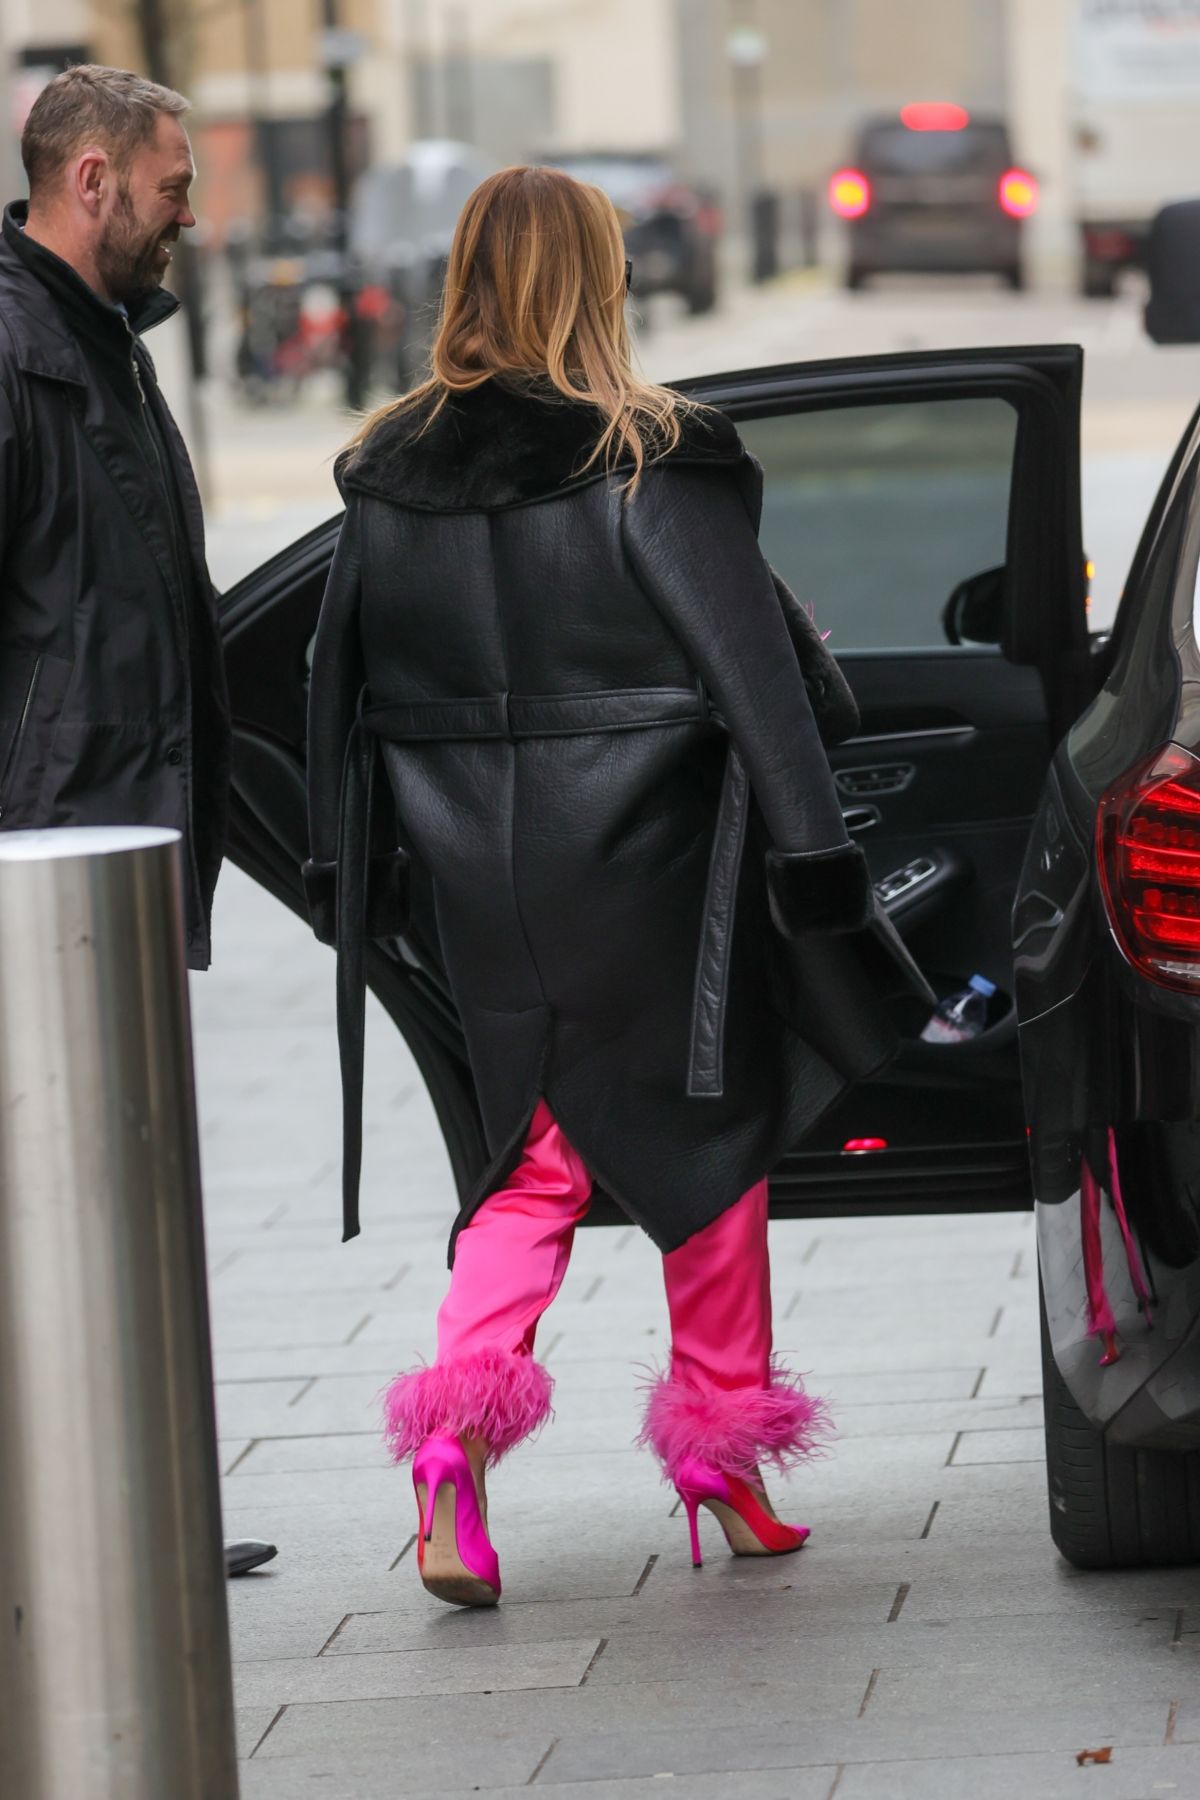 Amanda Holden arrives in Pink Outfit at Heart Radio London 2